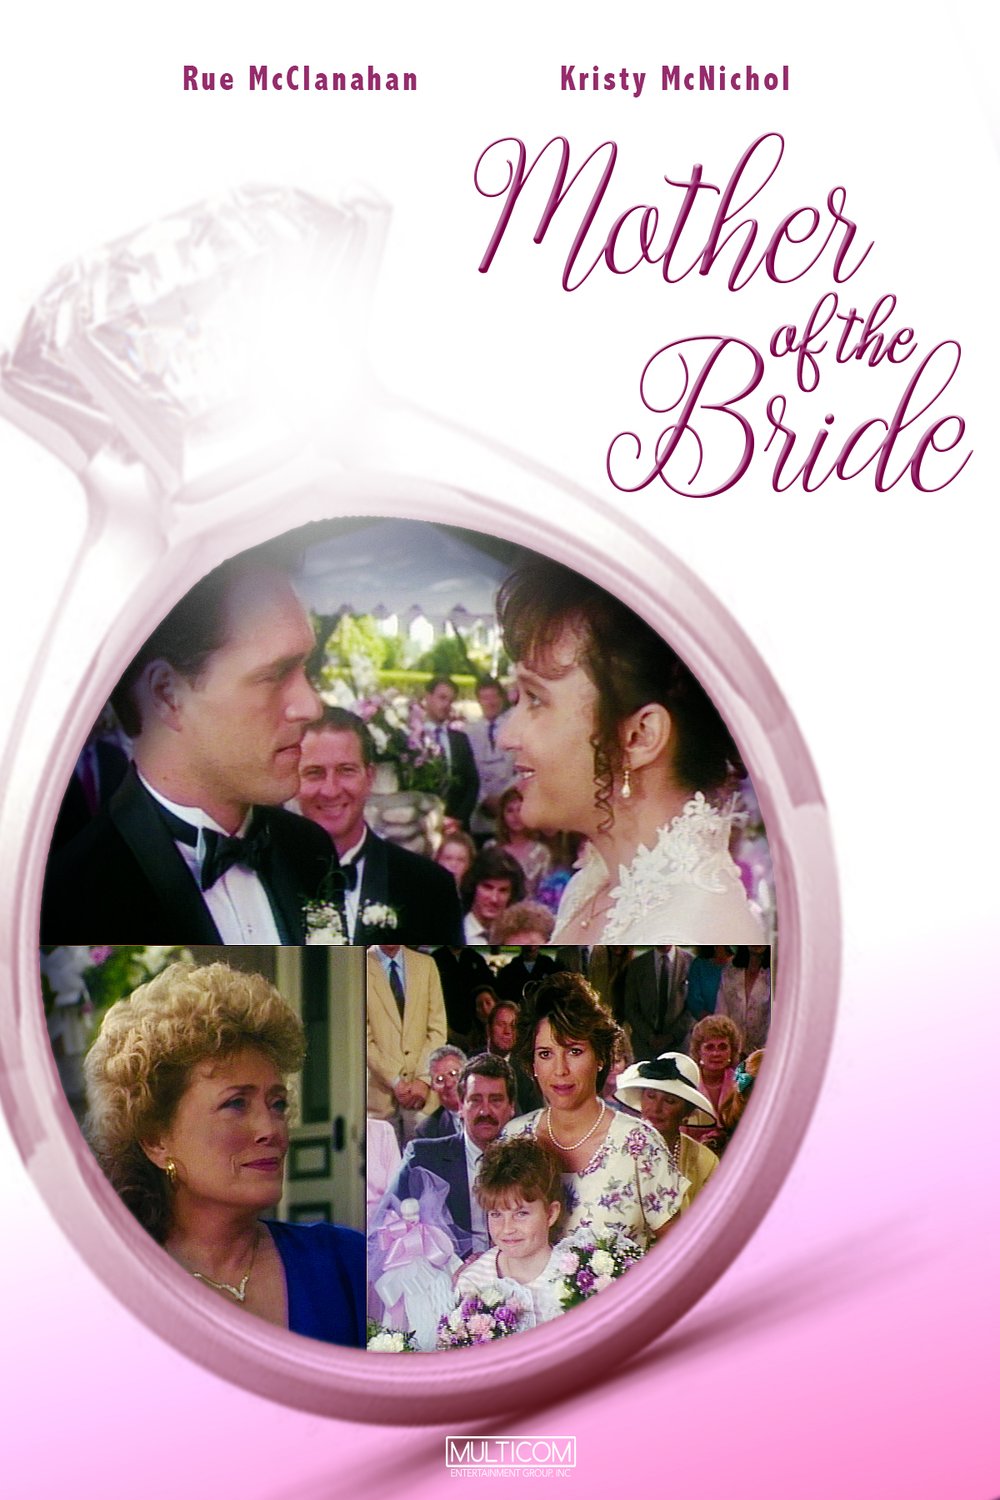 Poster of the movie Mother of the Bride